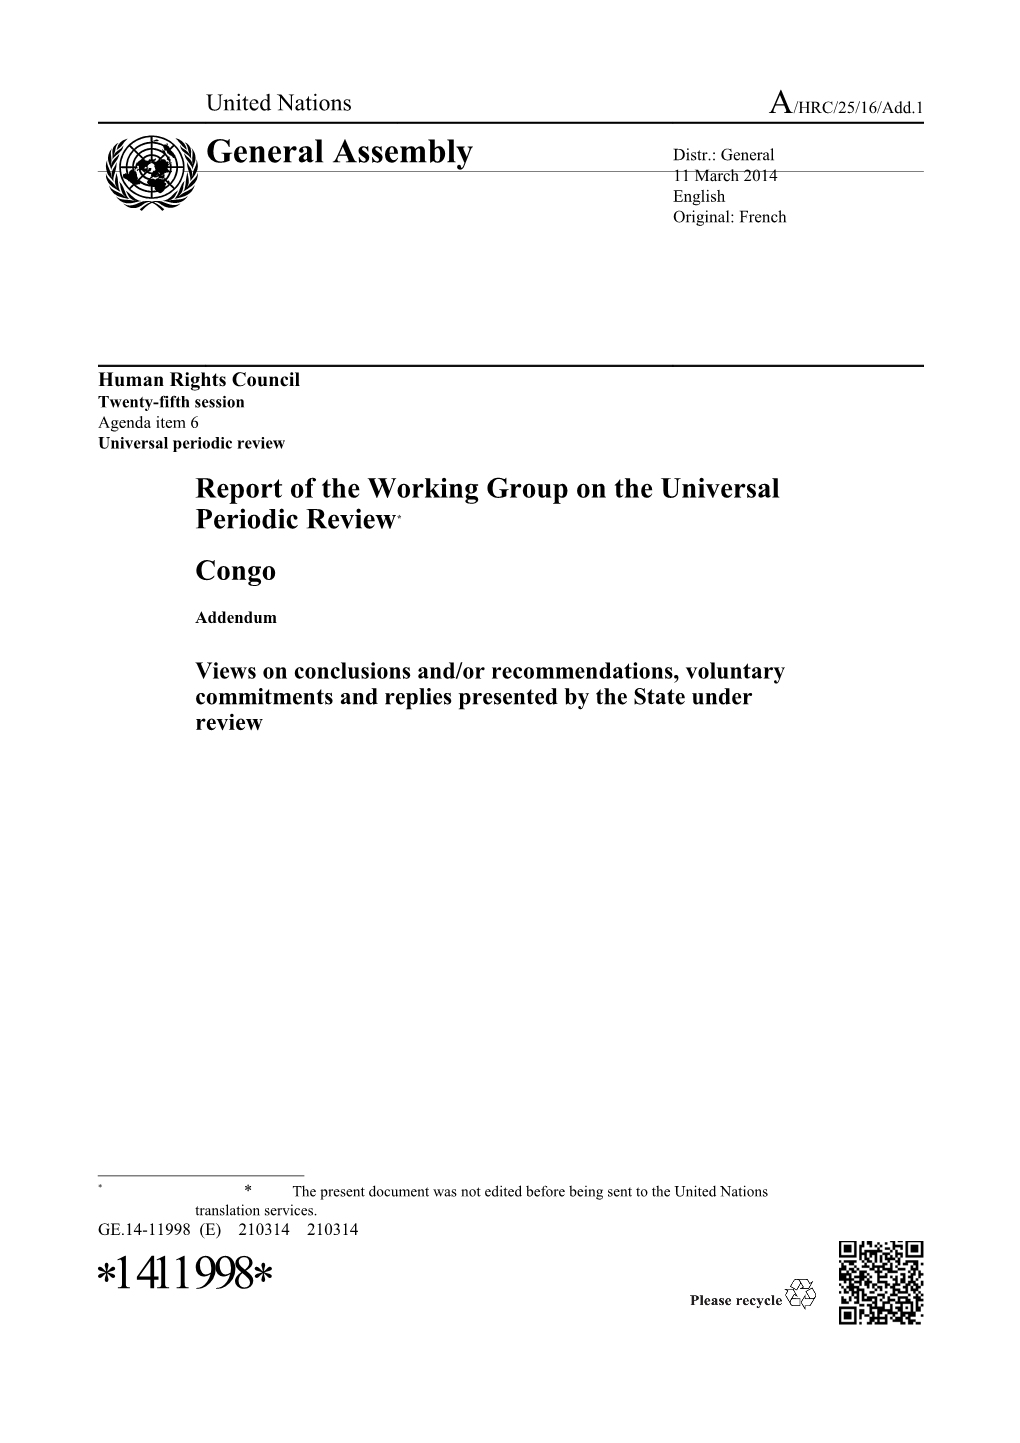 Addendum to the Report of the Working Group on the Universal Periodic Review - Congo in English